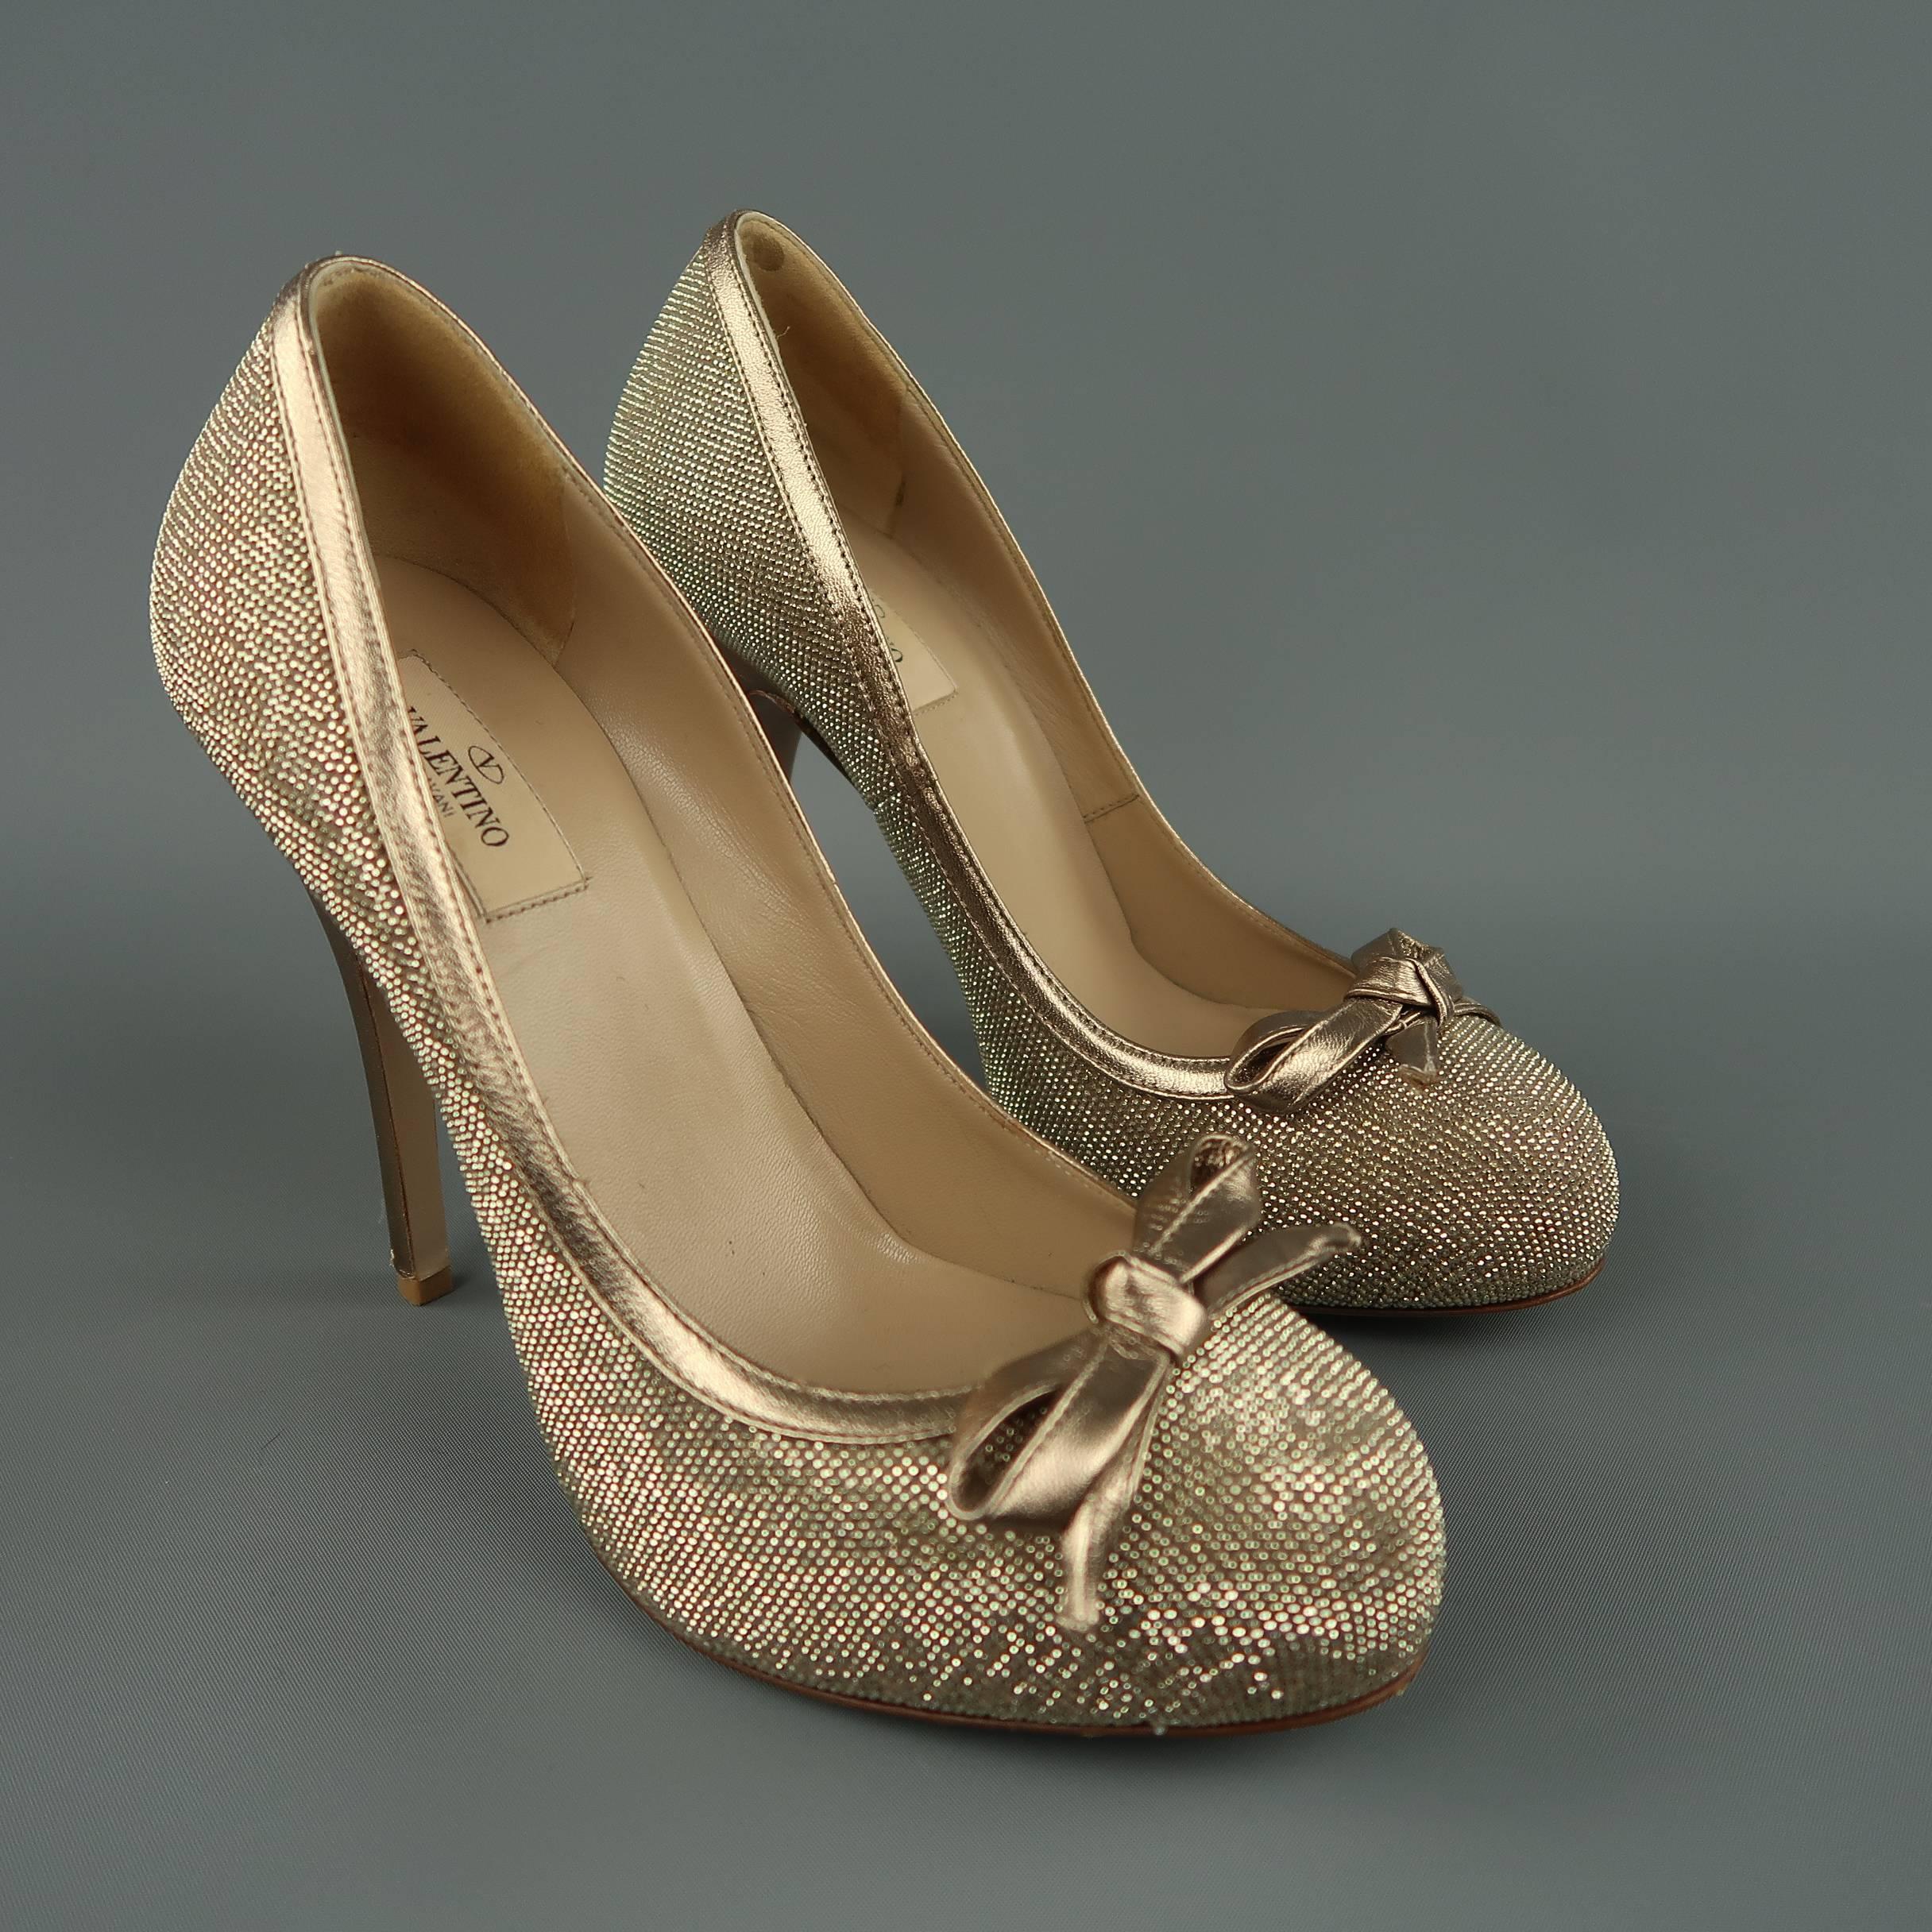 VALENTINO pumps come in metallic gold leather covered in tiny crystals and feature metallic piping and heel, hidden platform, and bow accent. Worn once. Small scuff on heel. Made in Italy.
 
Good Pre-Owned Condition.
Marked: IT 39
 
Heel: 5 in.
